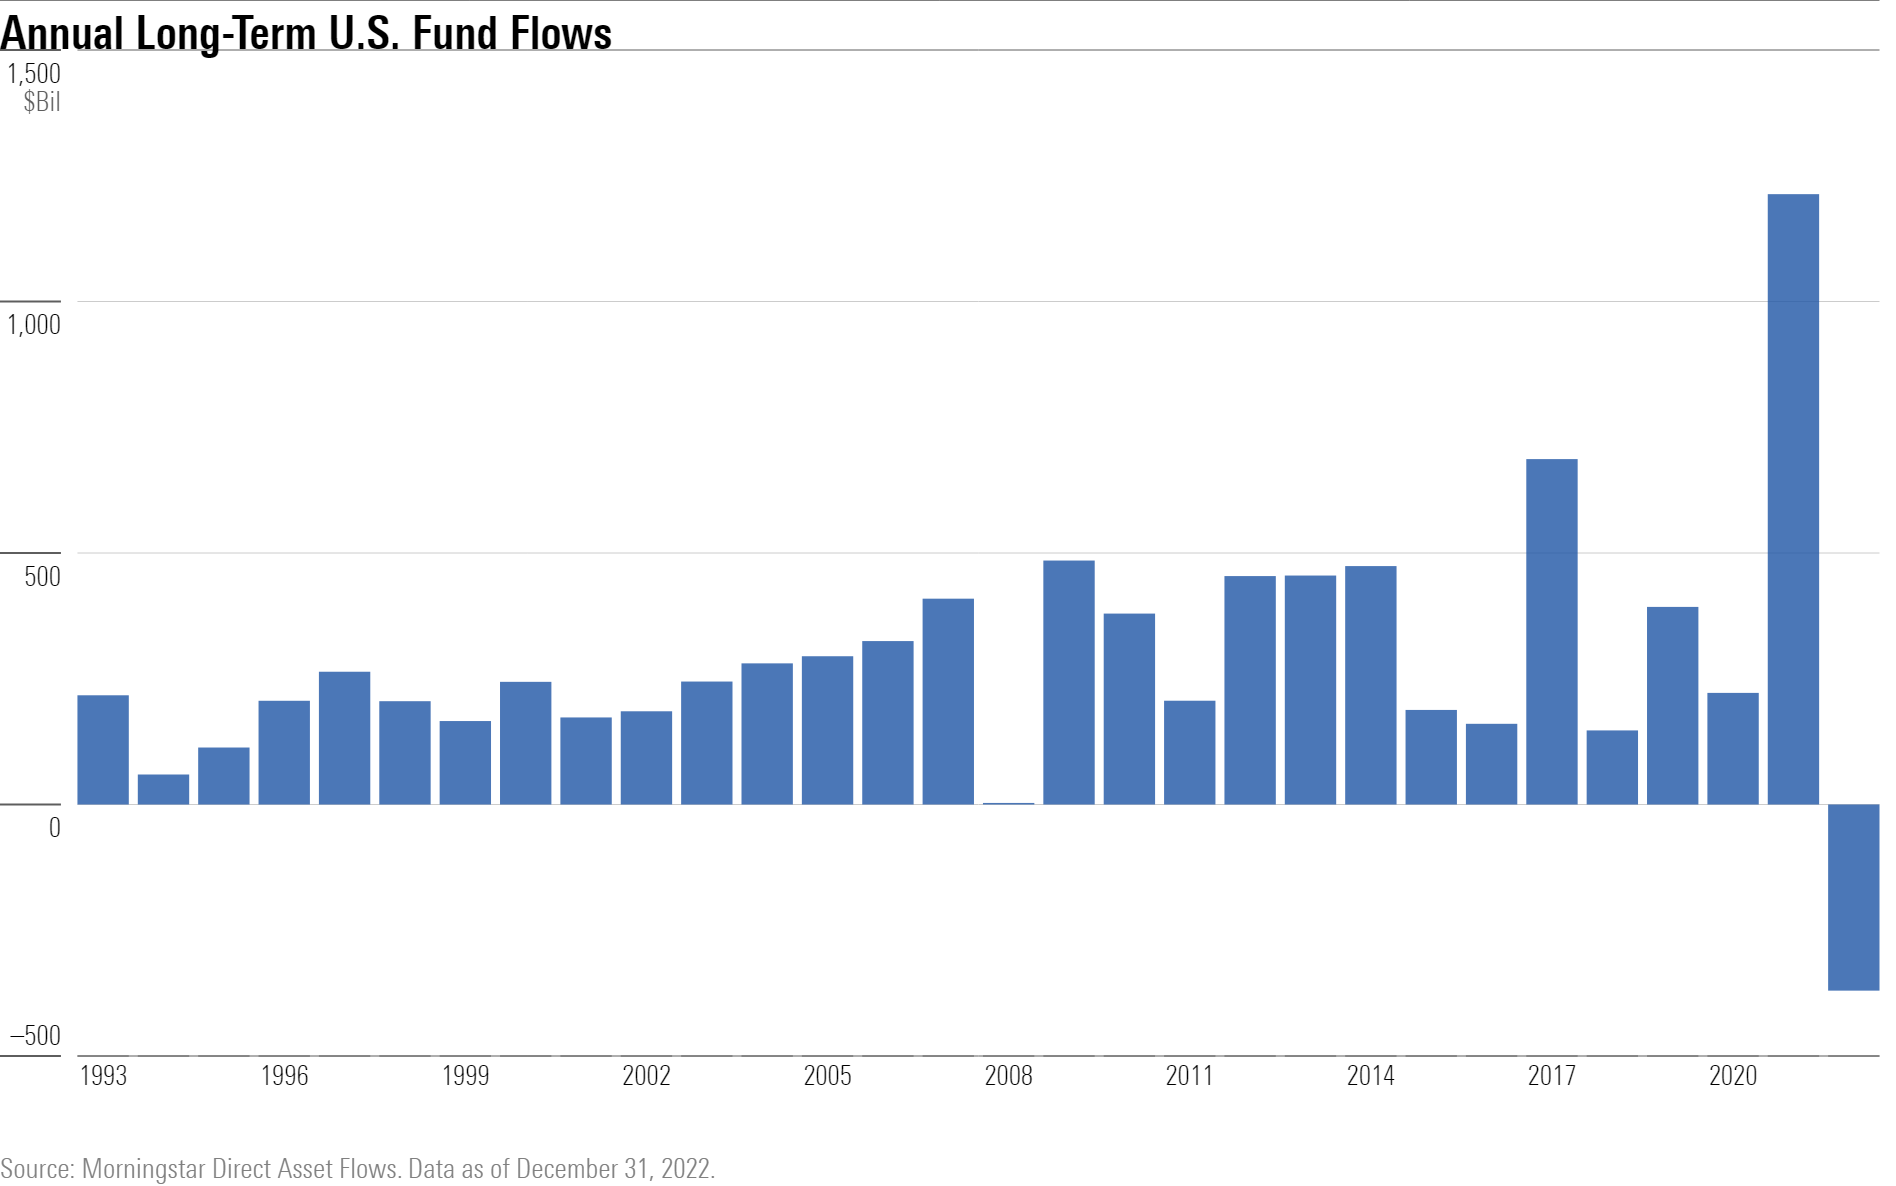 Bar chart of historical annual U.S. fund flows.